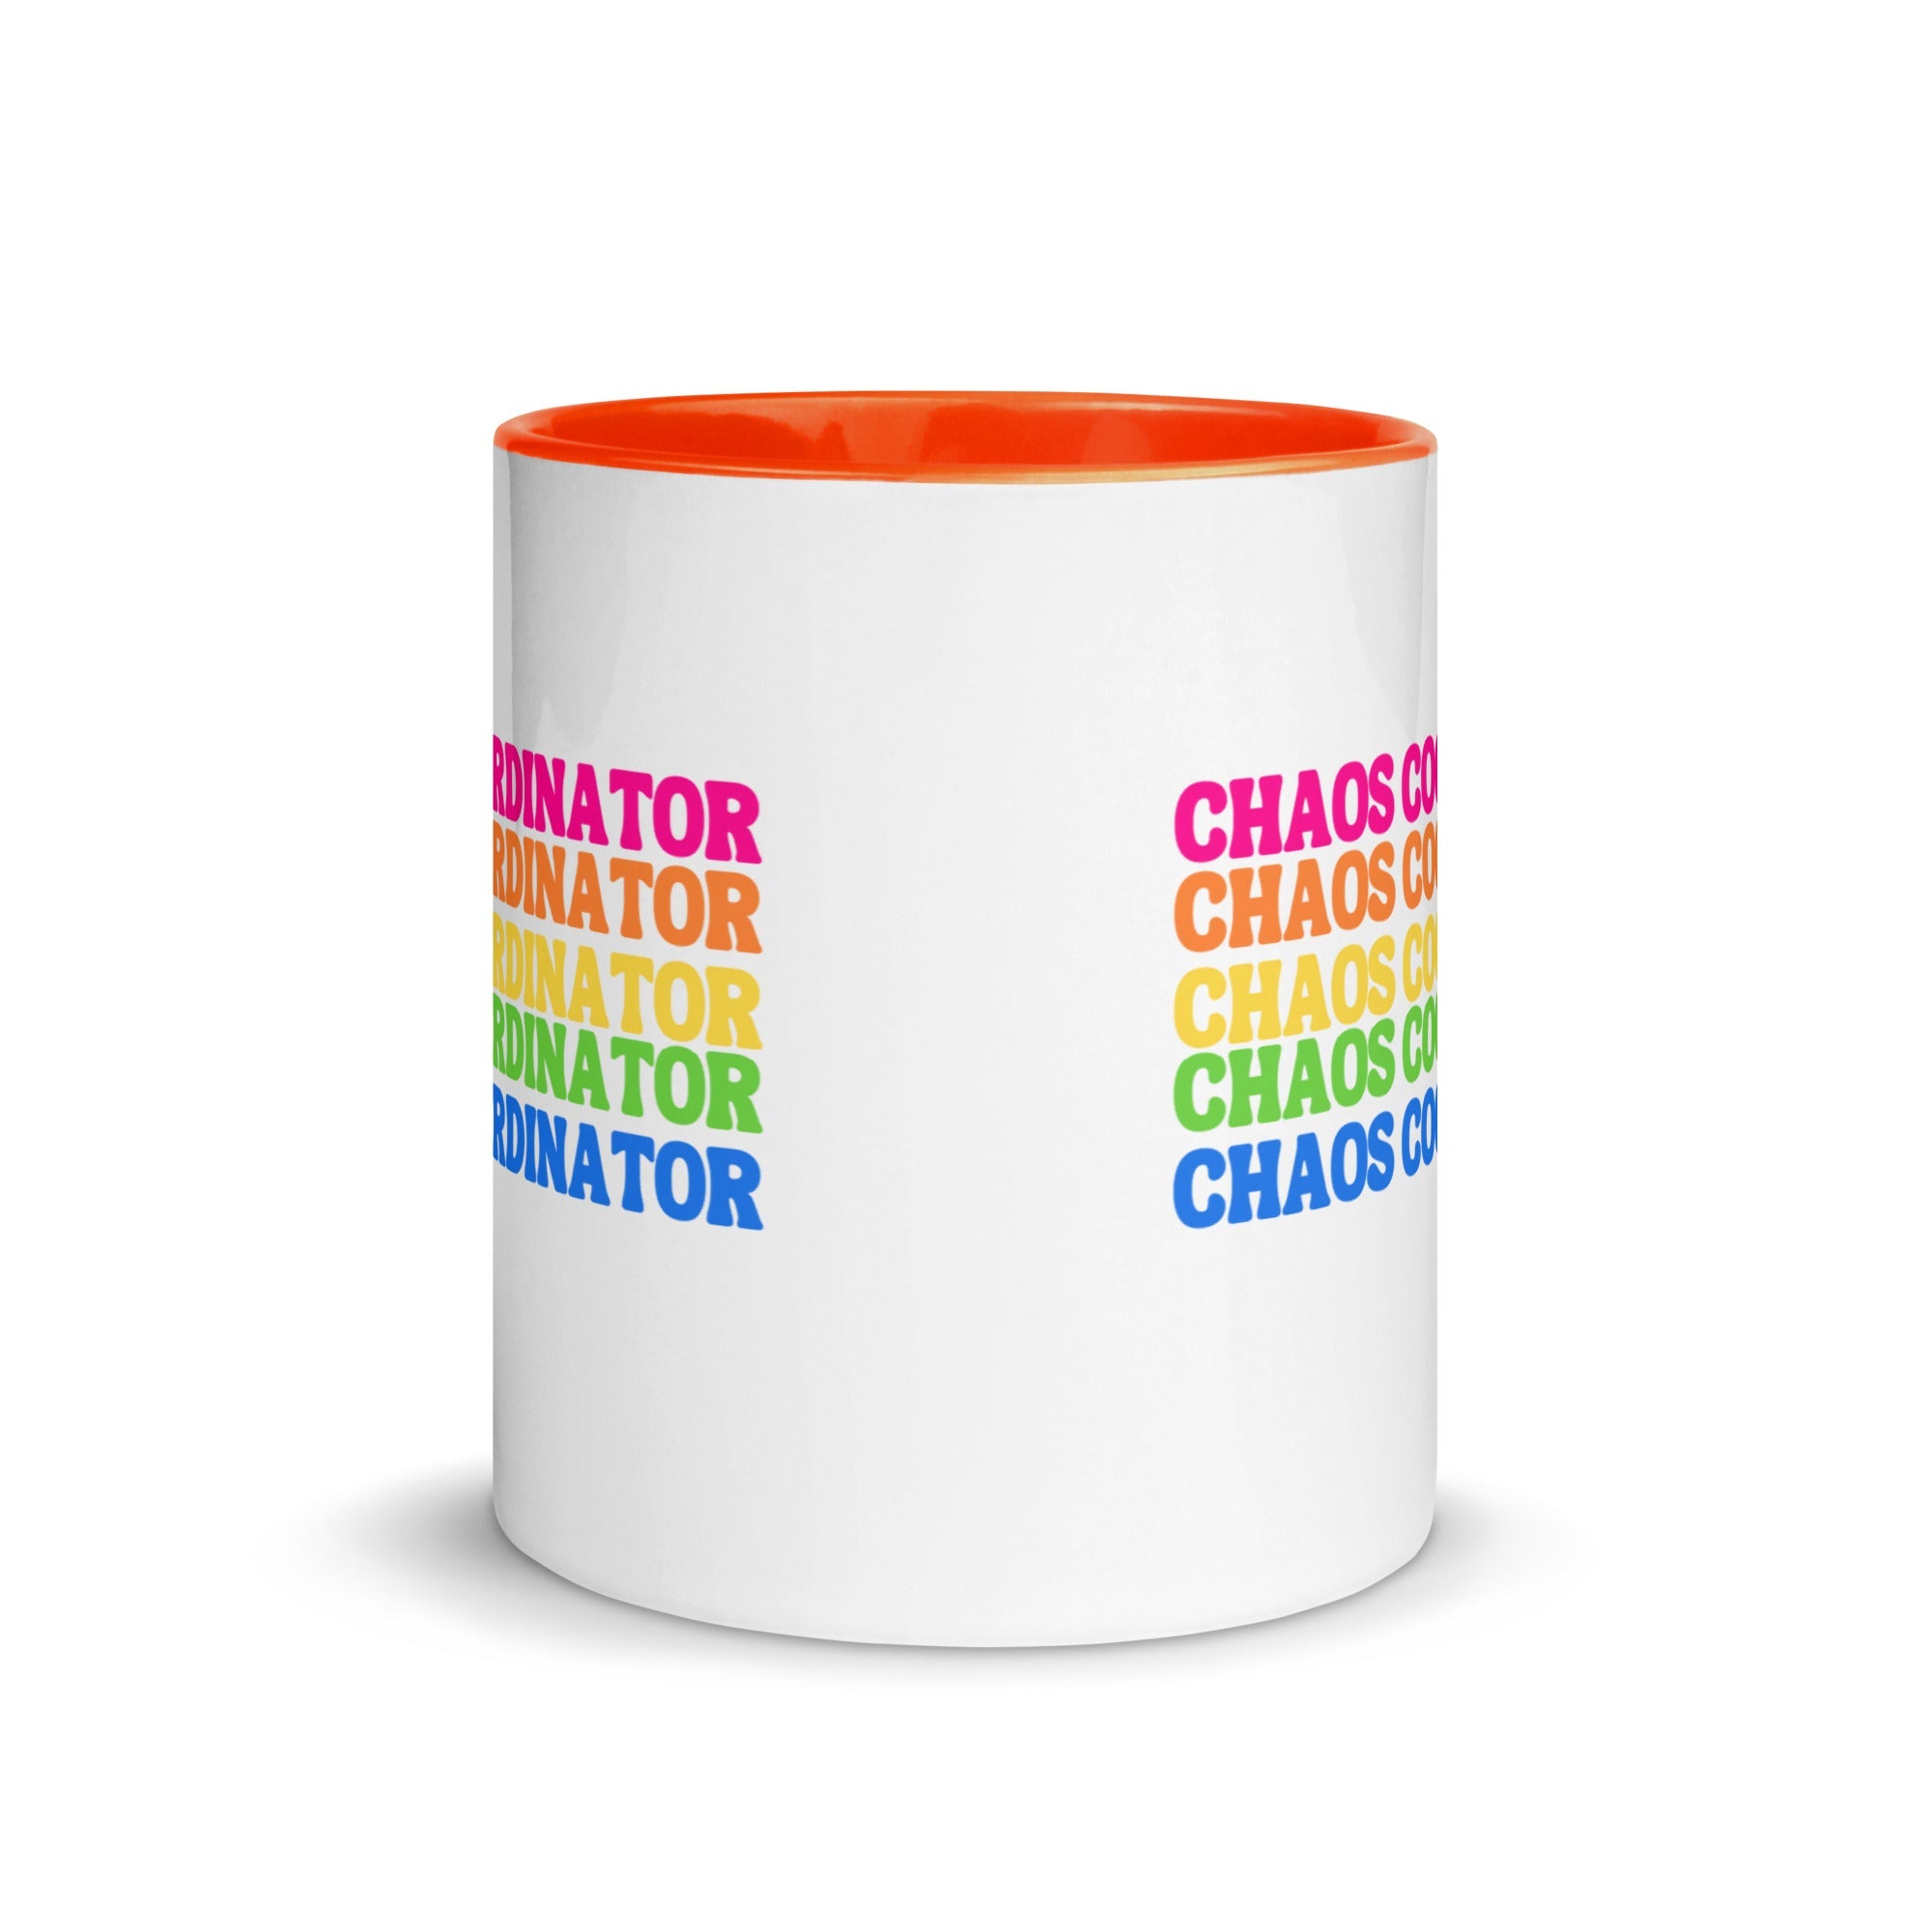 Chaos Coordinator Mug with Colorful Accents - The Kindness Cause